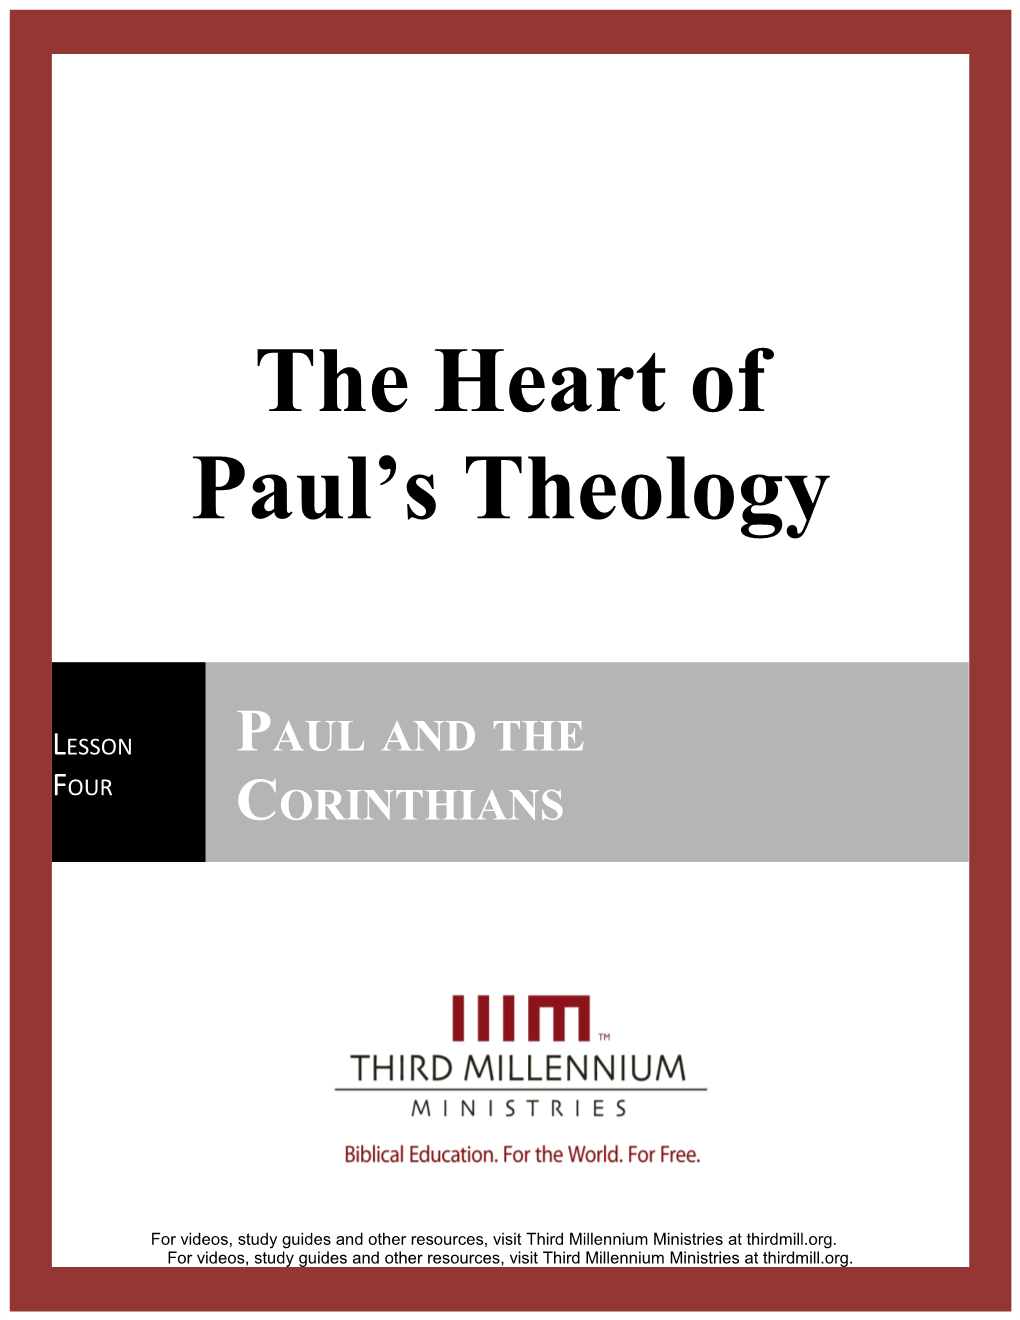 The Heart of Paul's Theology, Lesson 4